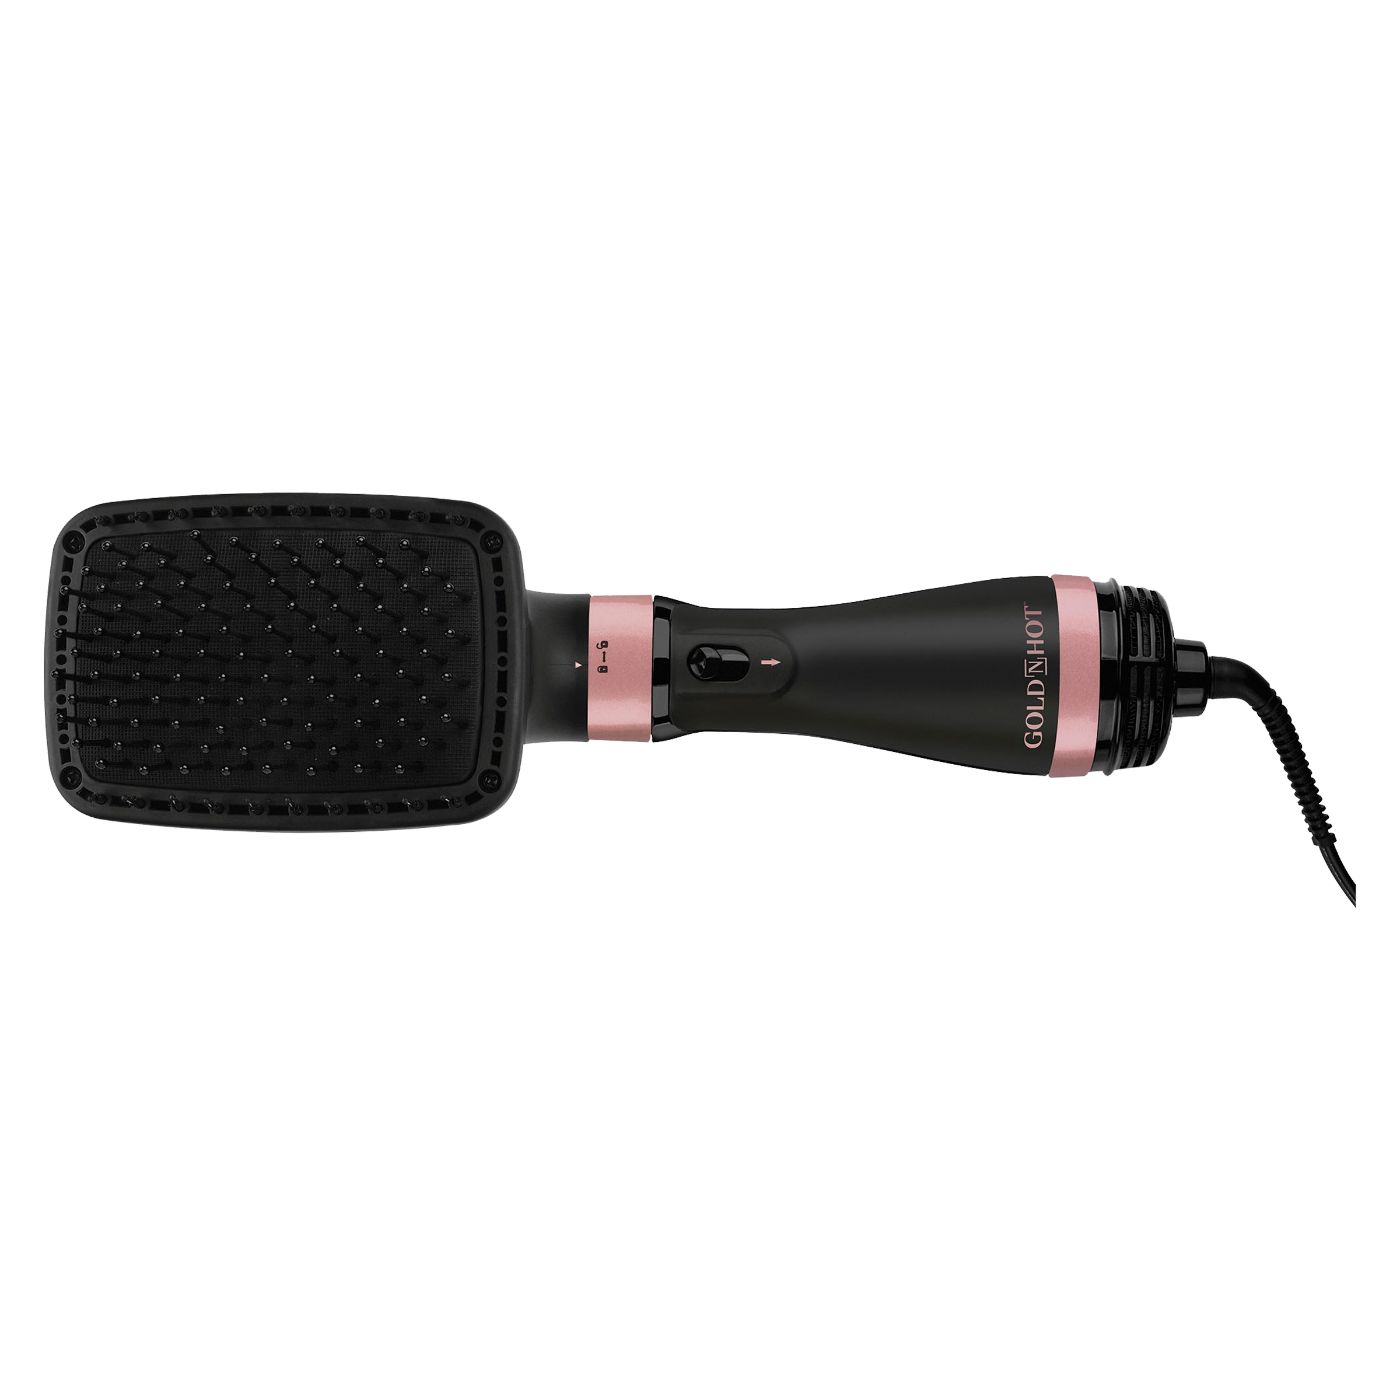 Professional Ionic Detachable Hair Dryer and Styler